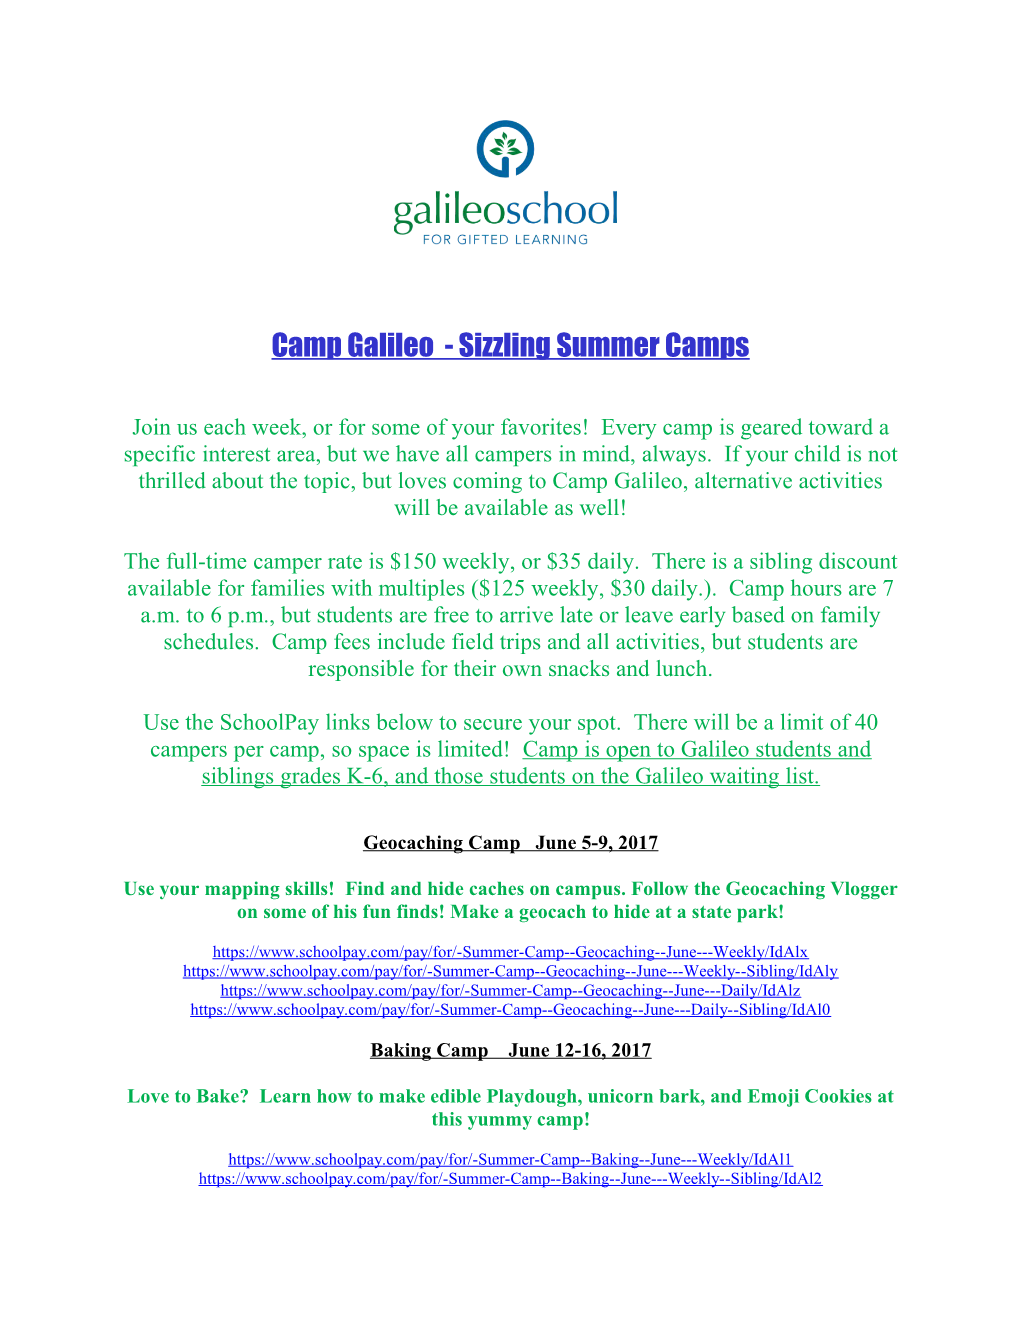 Camp Galileo - Sizzling Summer Camps